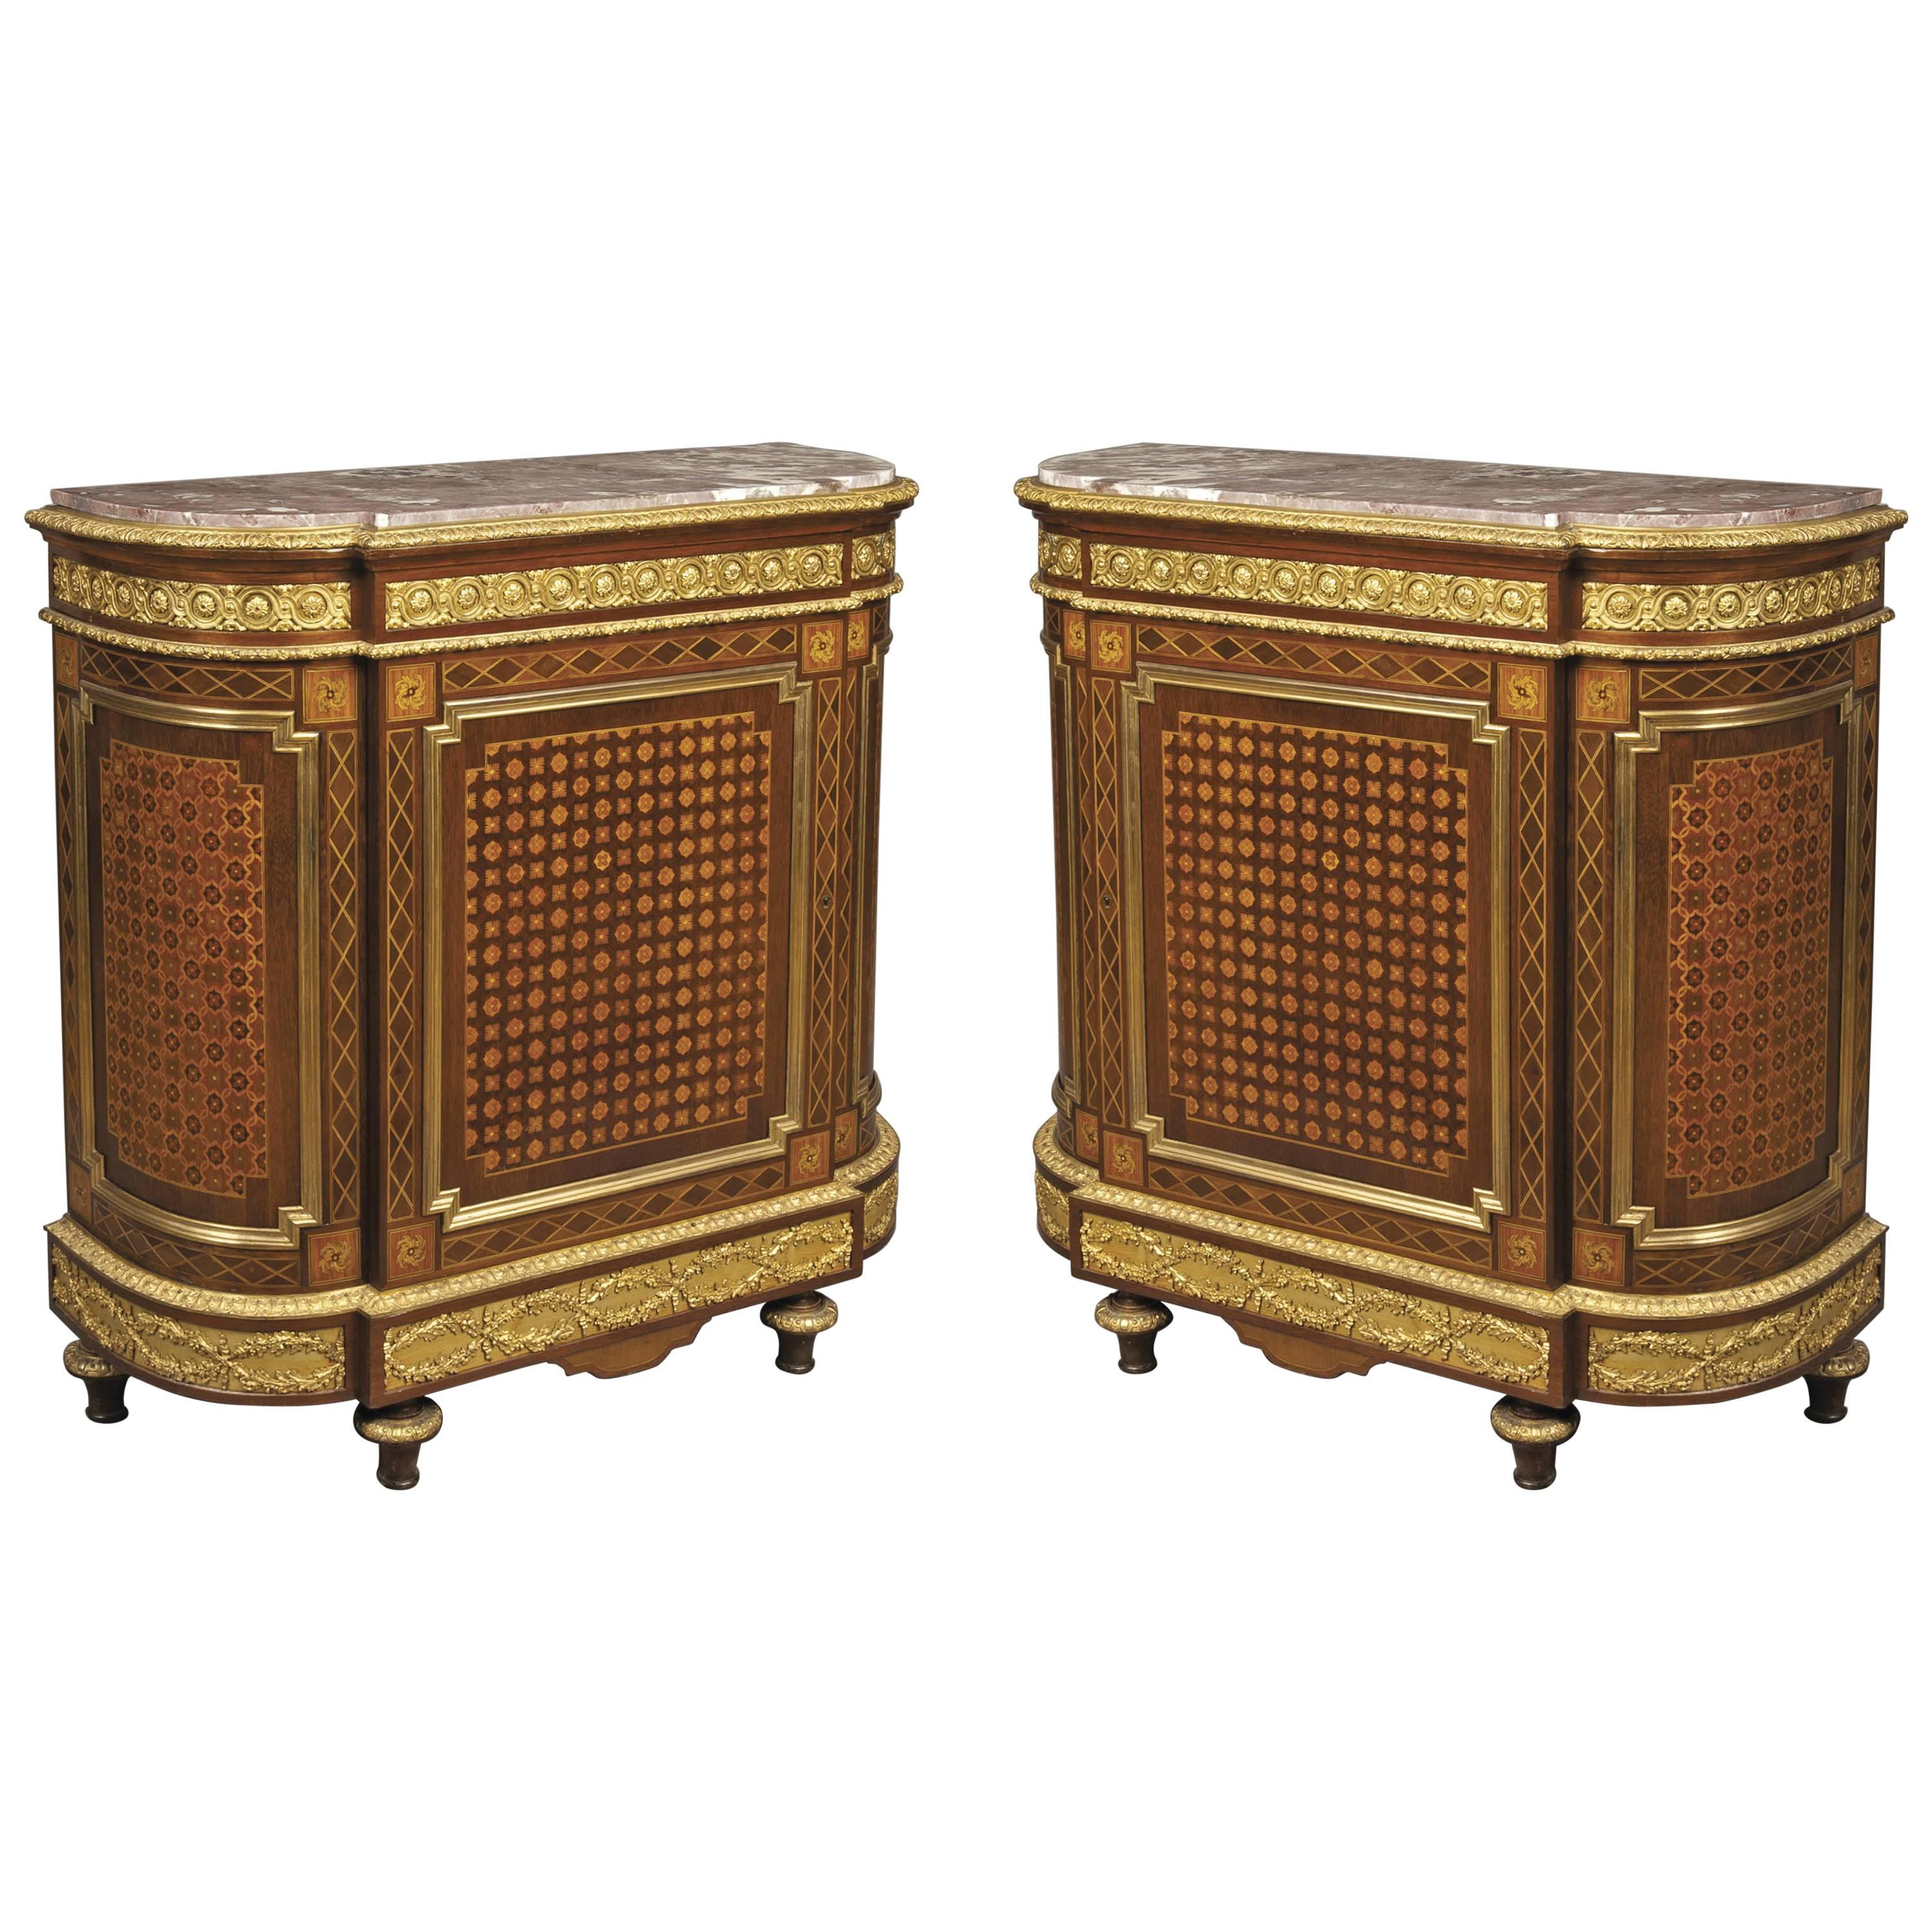 Pair of French Marquetry and Parquetry Gilt Side Cabinets, 19th Century 